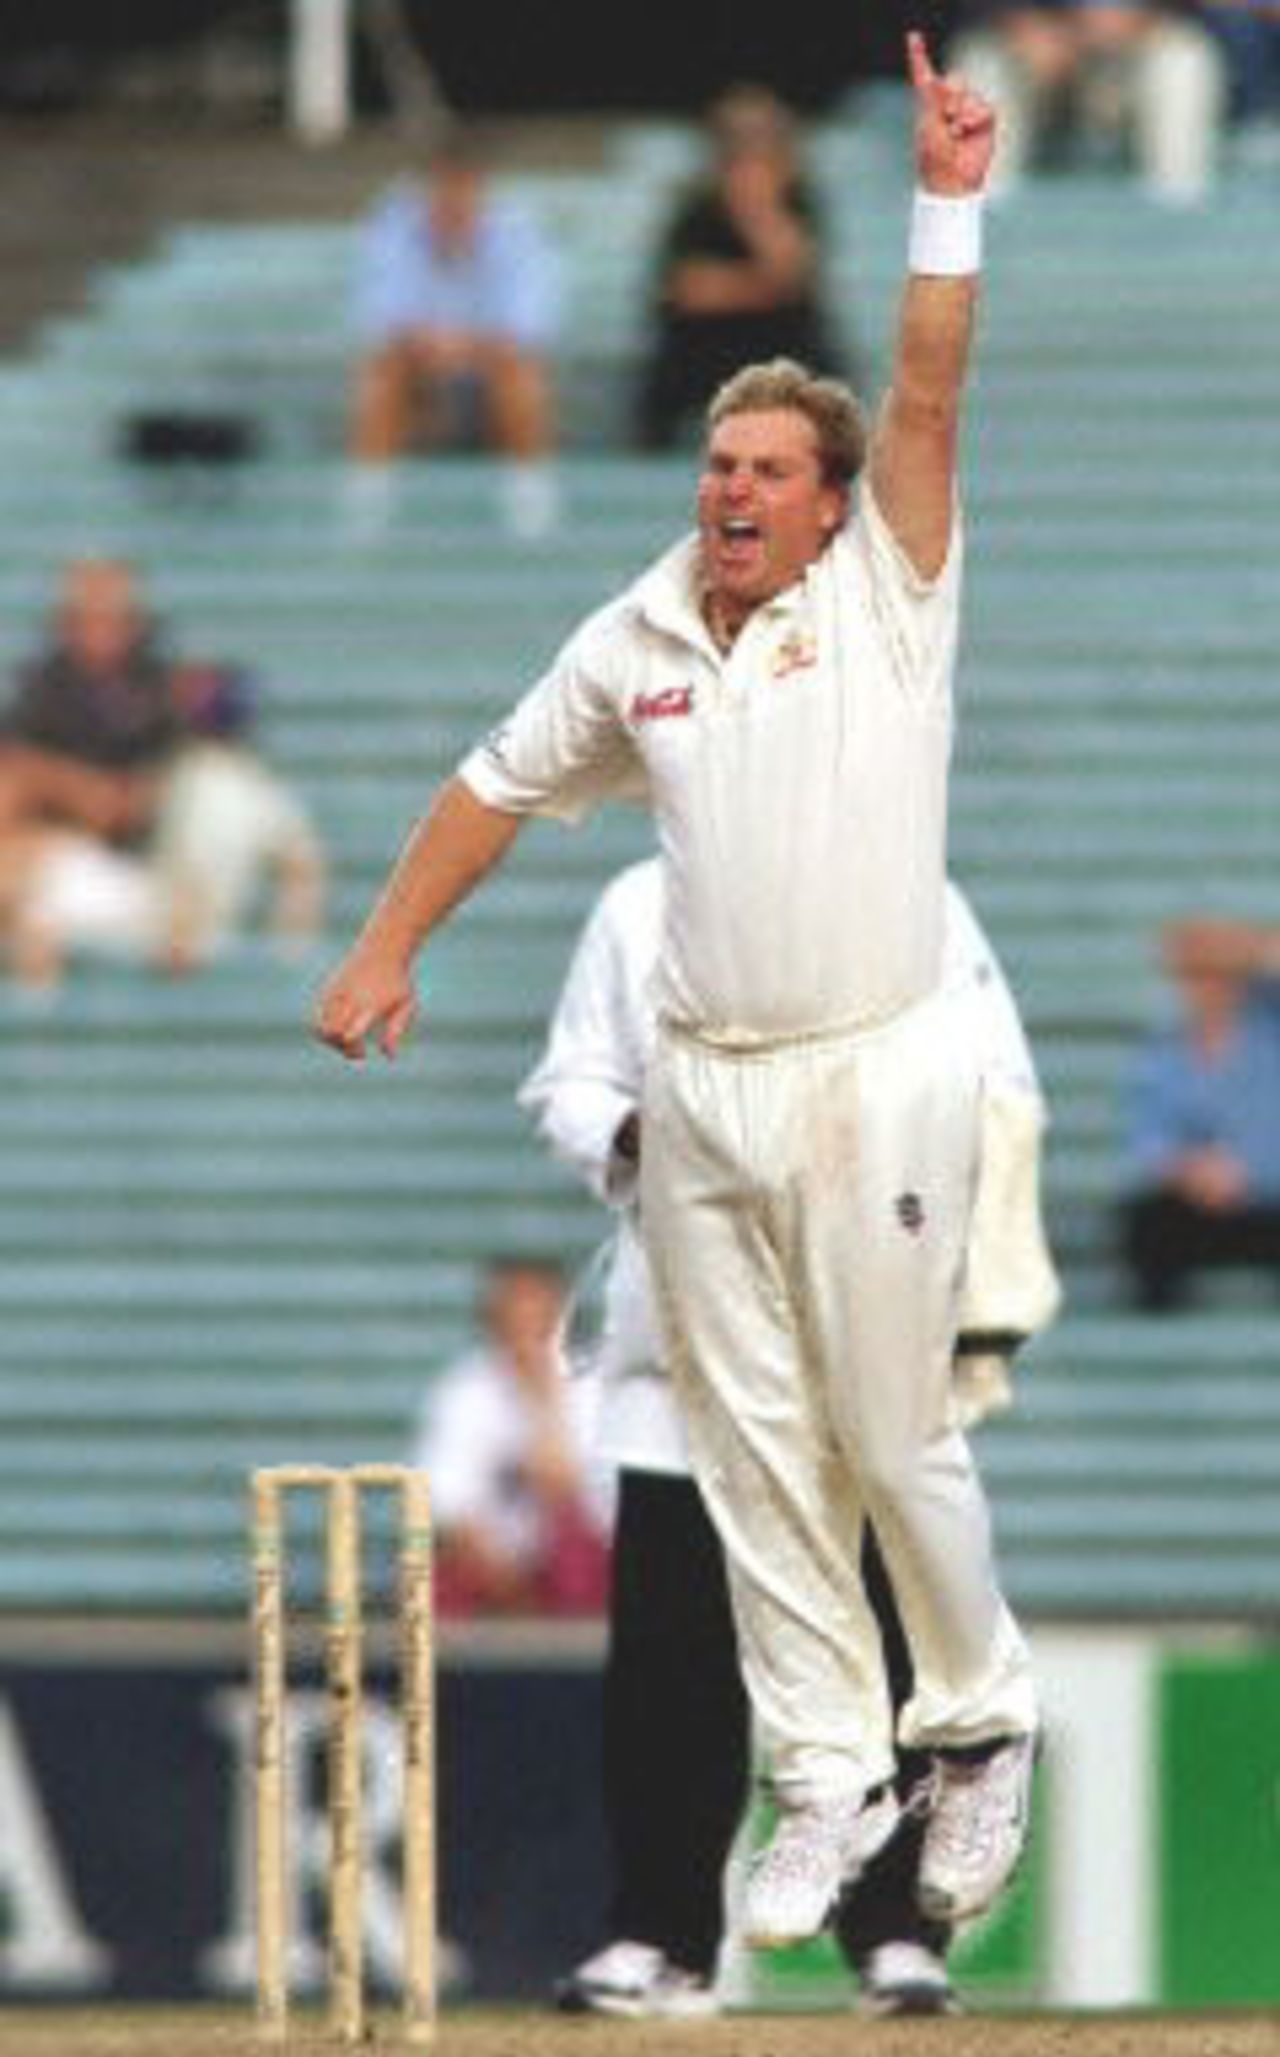 Australian spinner Shane Warne celebrates dismissing New Zealand batsman Nathan Astle to equal the Australian test wicket taking record held by former paceman Dennis Lillee on the third day of the first Test Match being played at Eden Park in Auckland, 13 March 2000. New Zealand, who is chasing 281 runs for victory, are 151-5 at stumps.